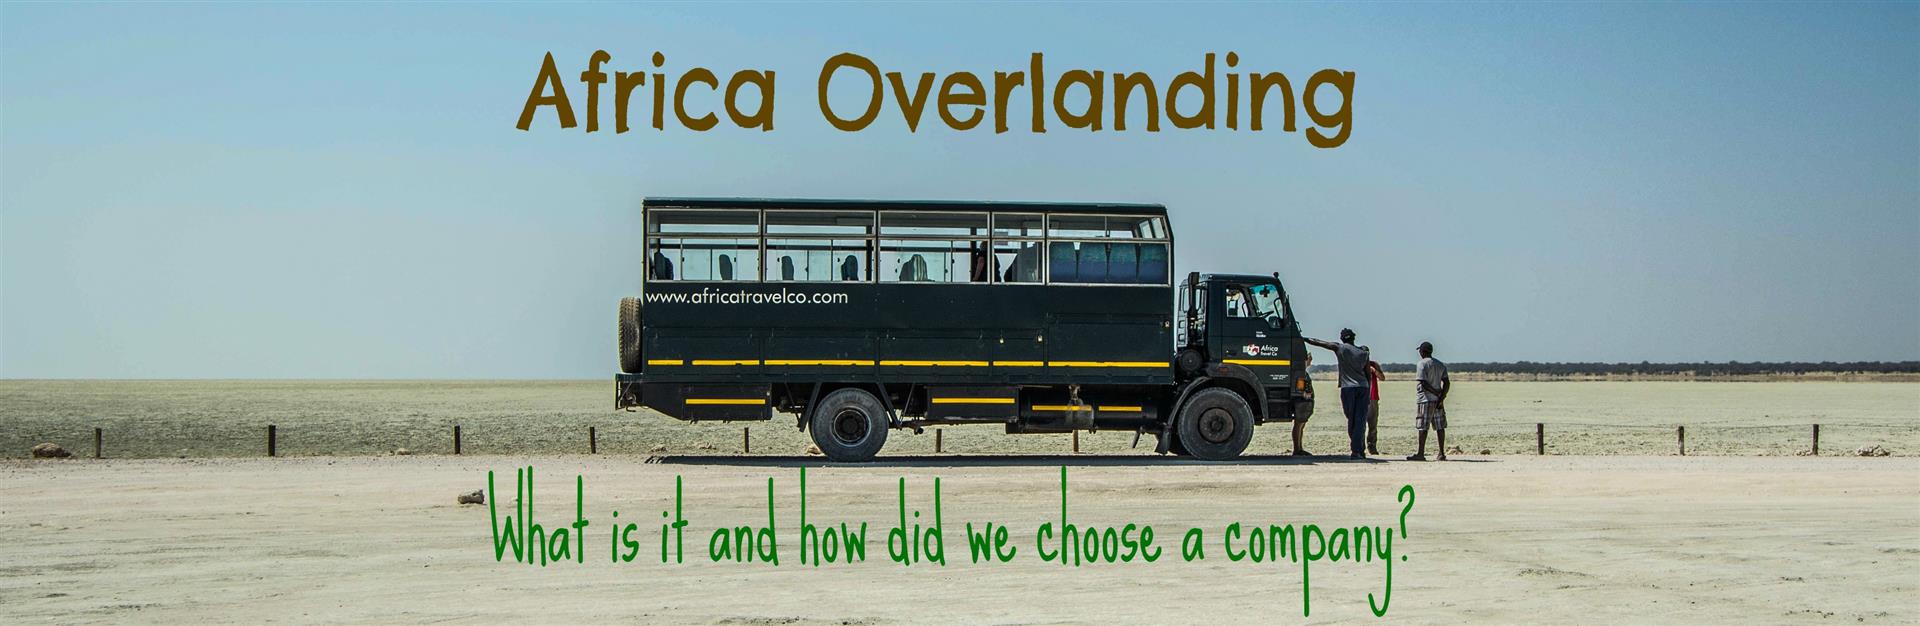 Africa Overlanding? What is it and how did we choose a company?